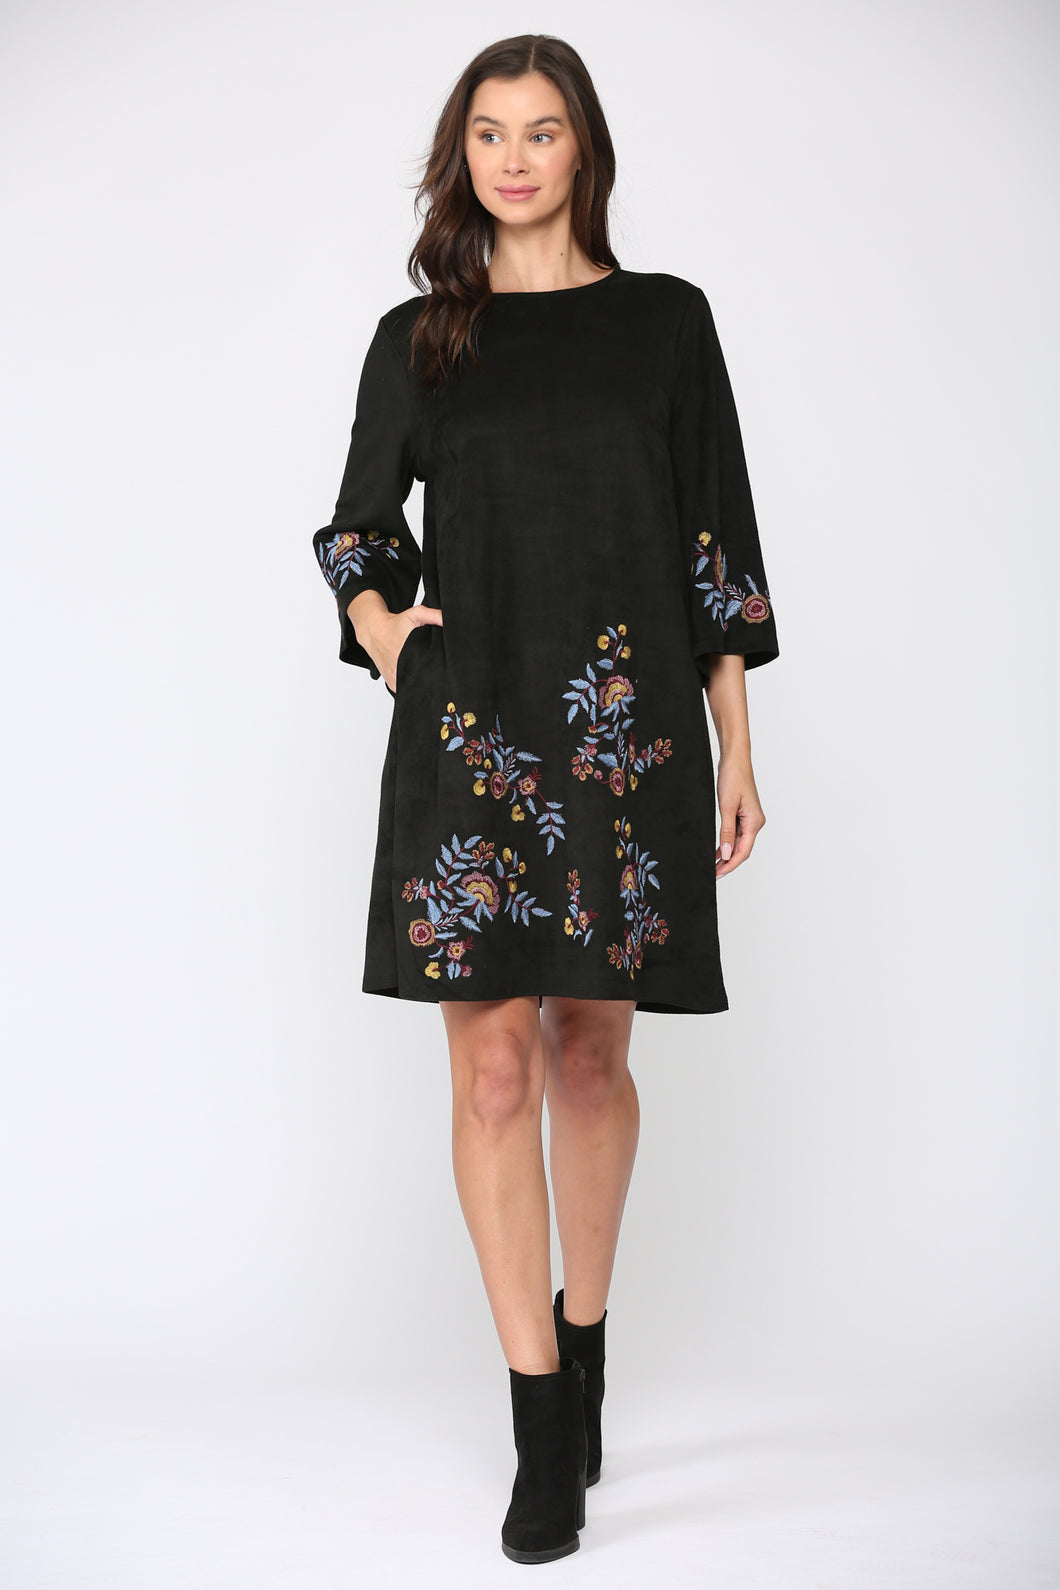 Avery Suede Embroidered Dress